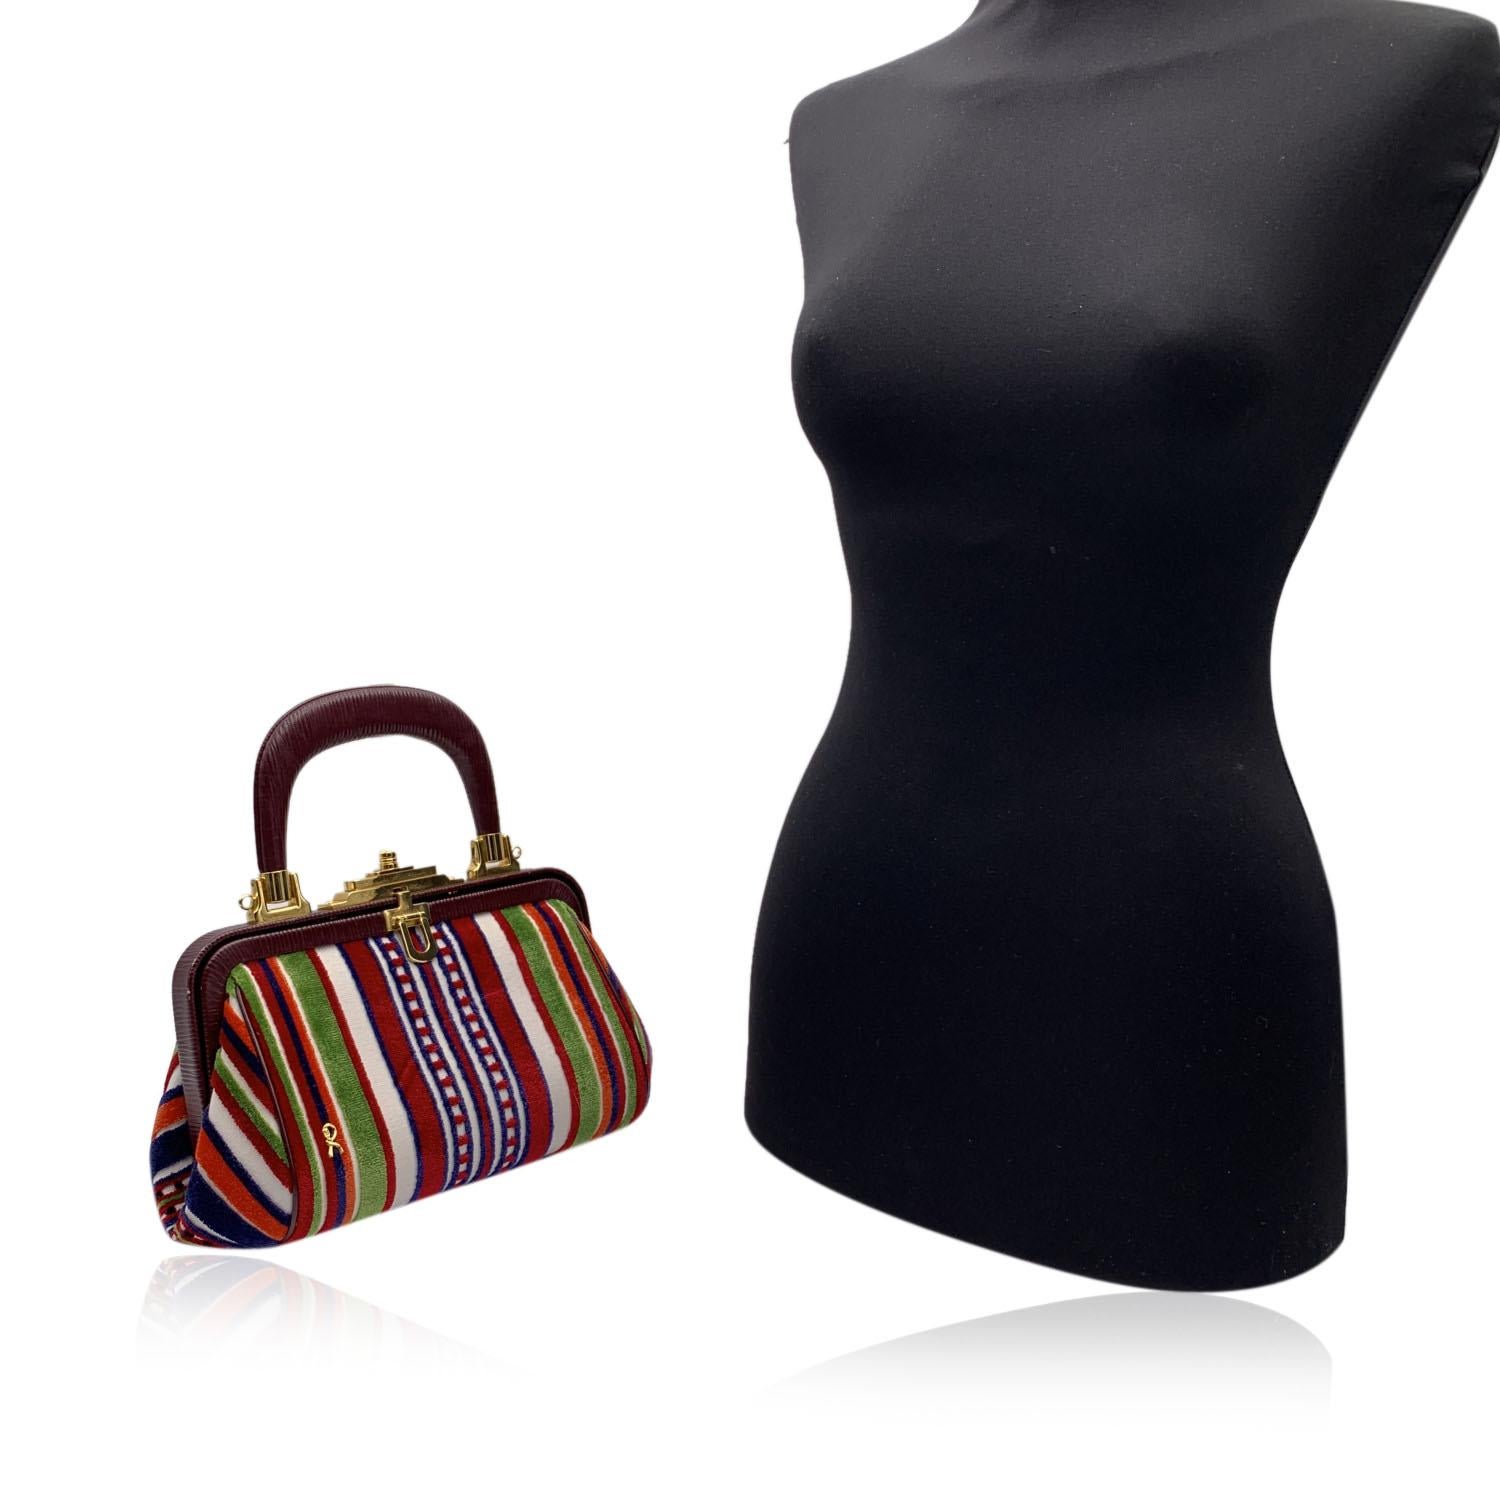 Gorgeous ROBERTA DI CAMERINO Small 'Bagonghi' Doctor Bag! Classic style in multicolor cut-out striped velvet with burgundy leather trim and handle. Gold metal hardware. It features a leather top-handle and a push-lock closure. Leather lined interior